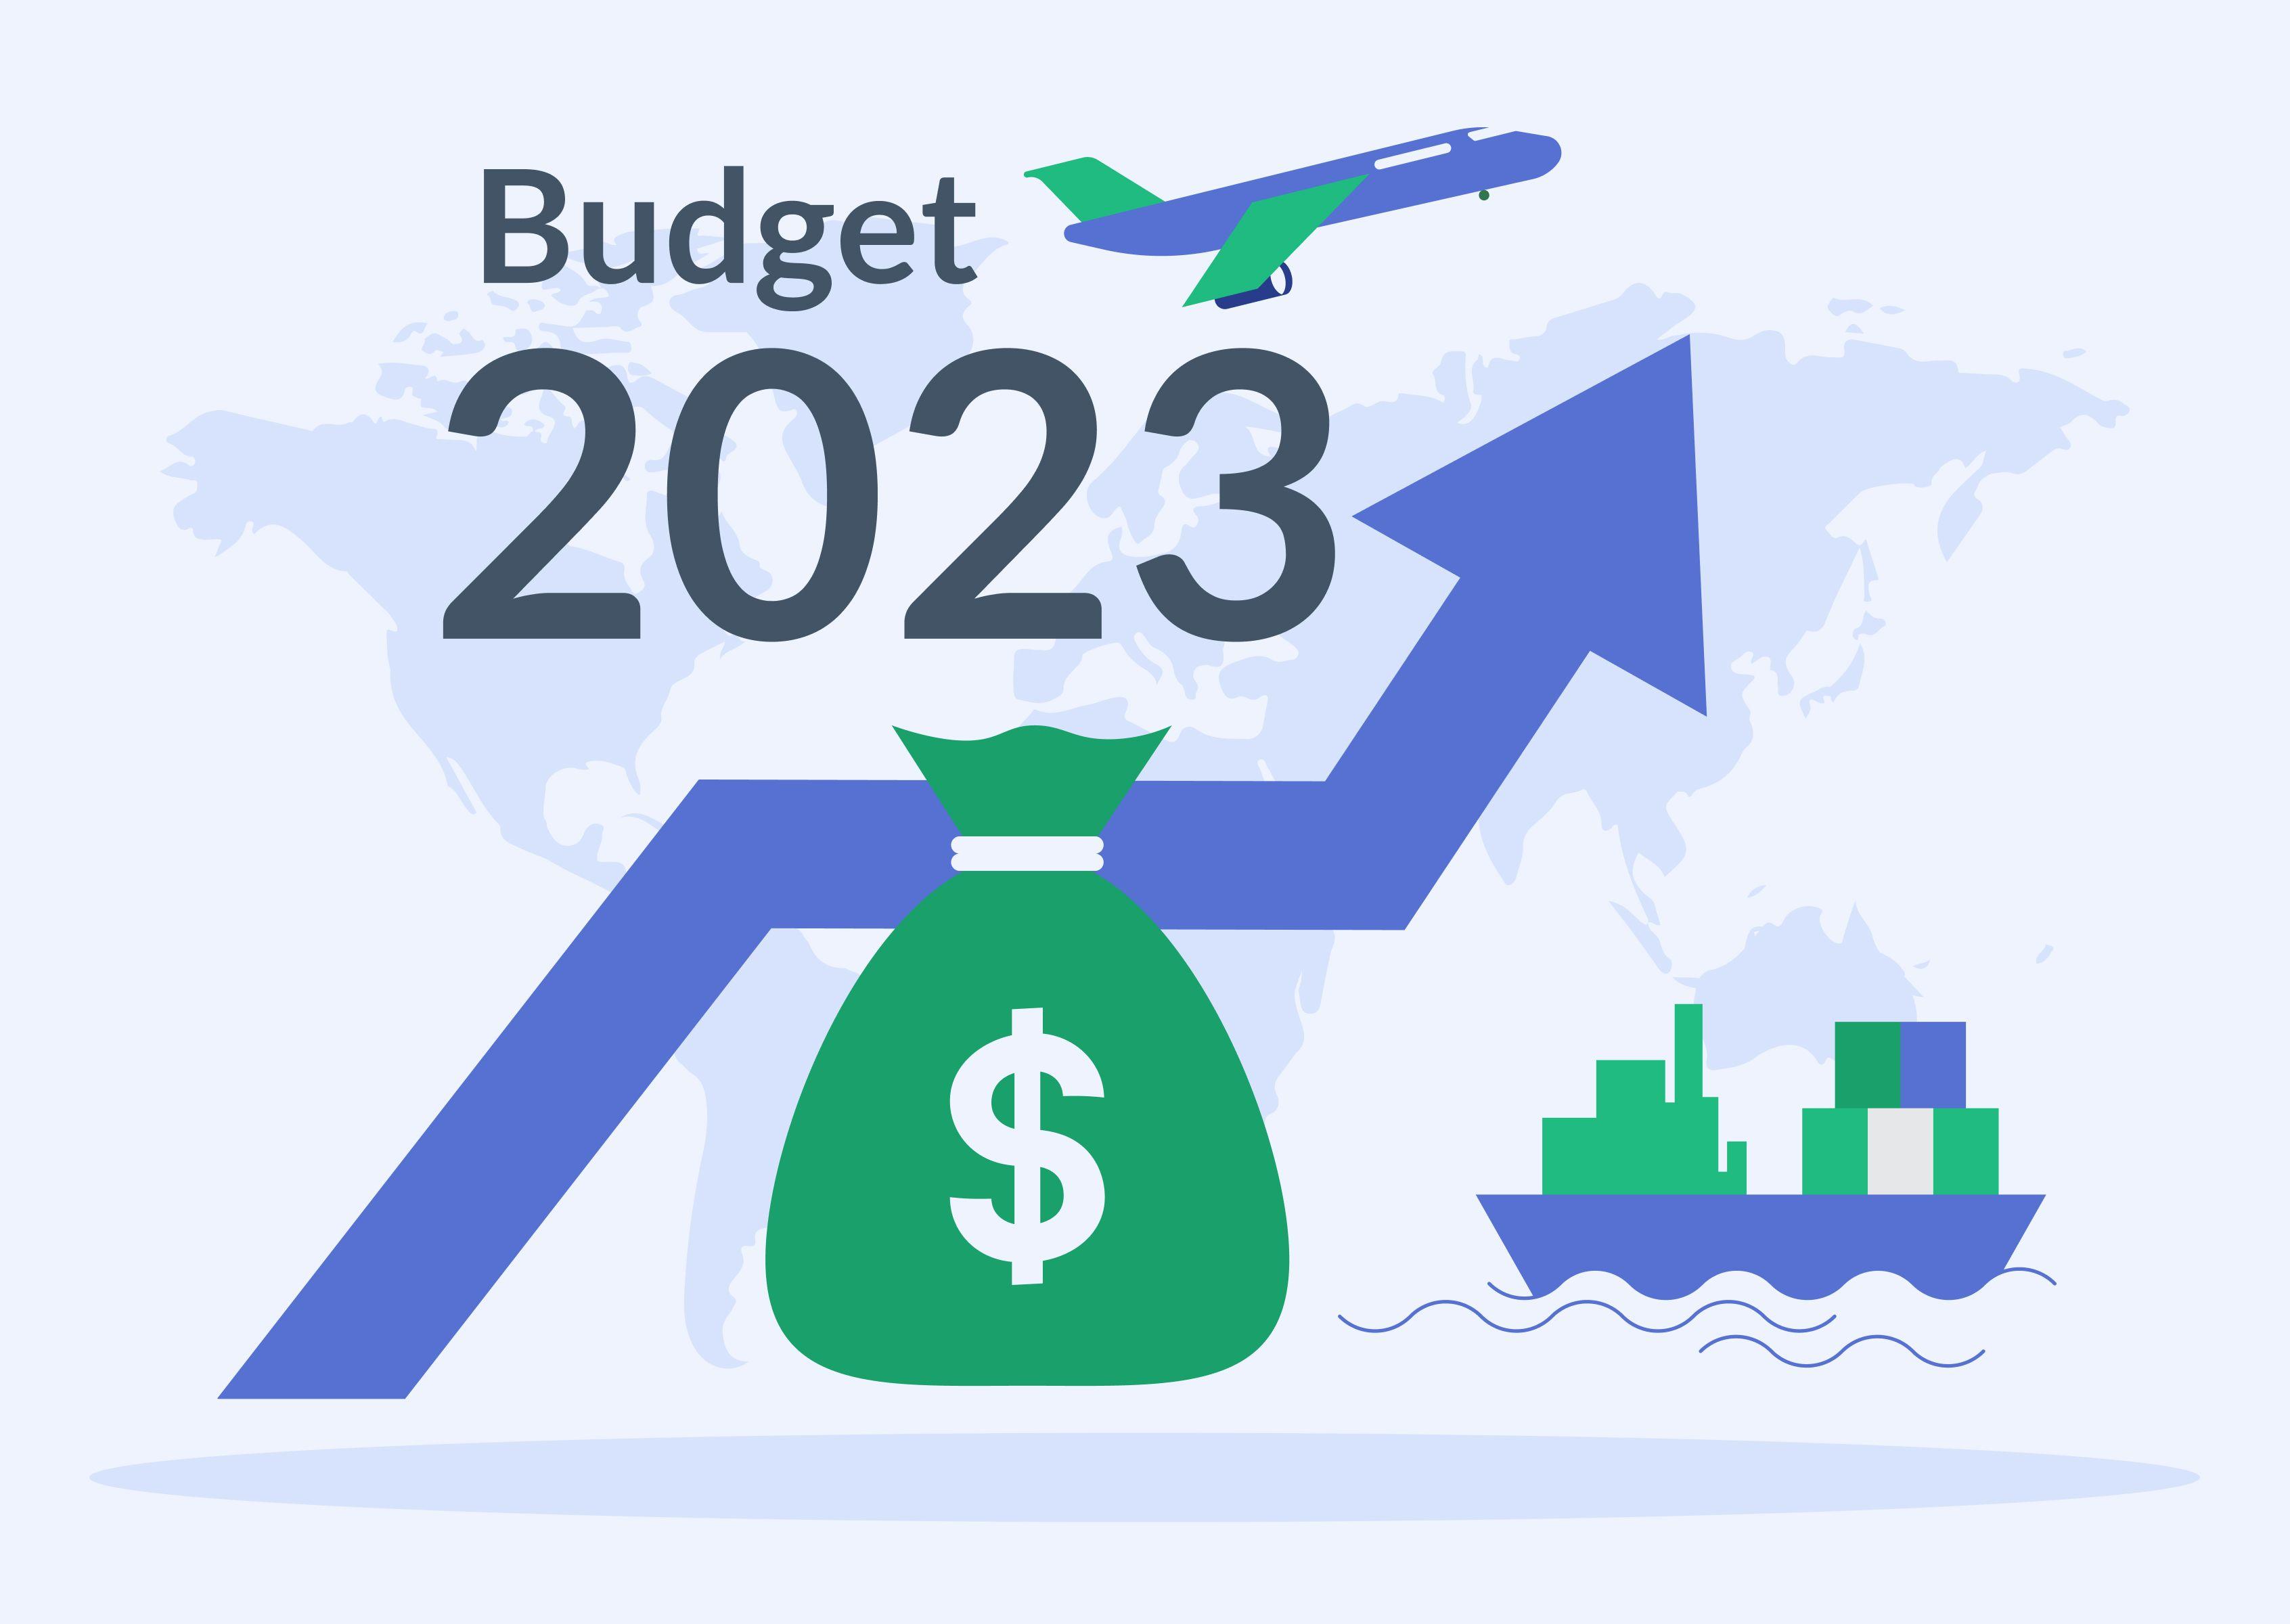 What do exporters expect from the 2023 budget?